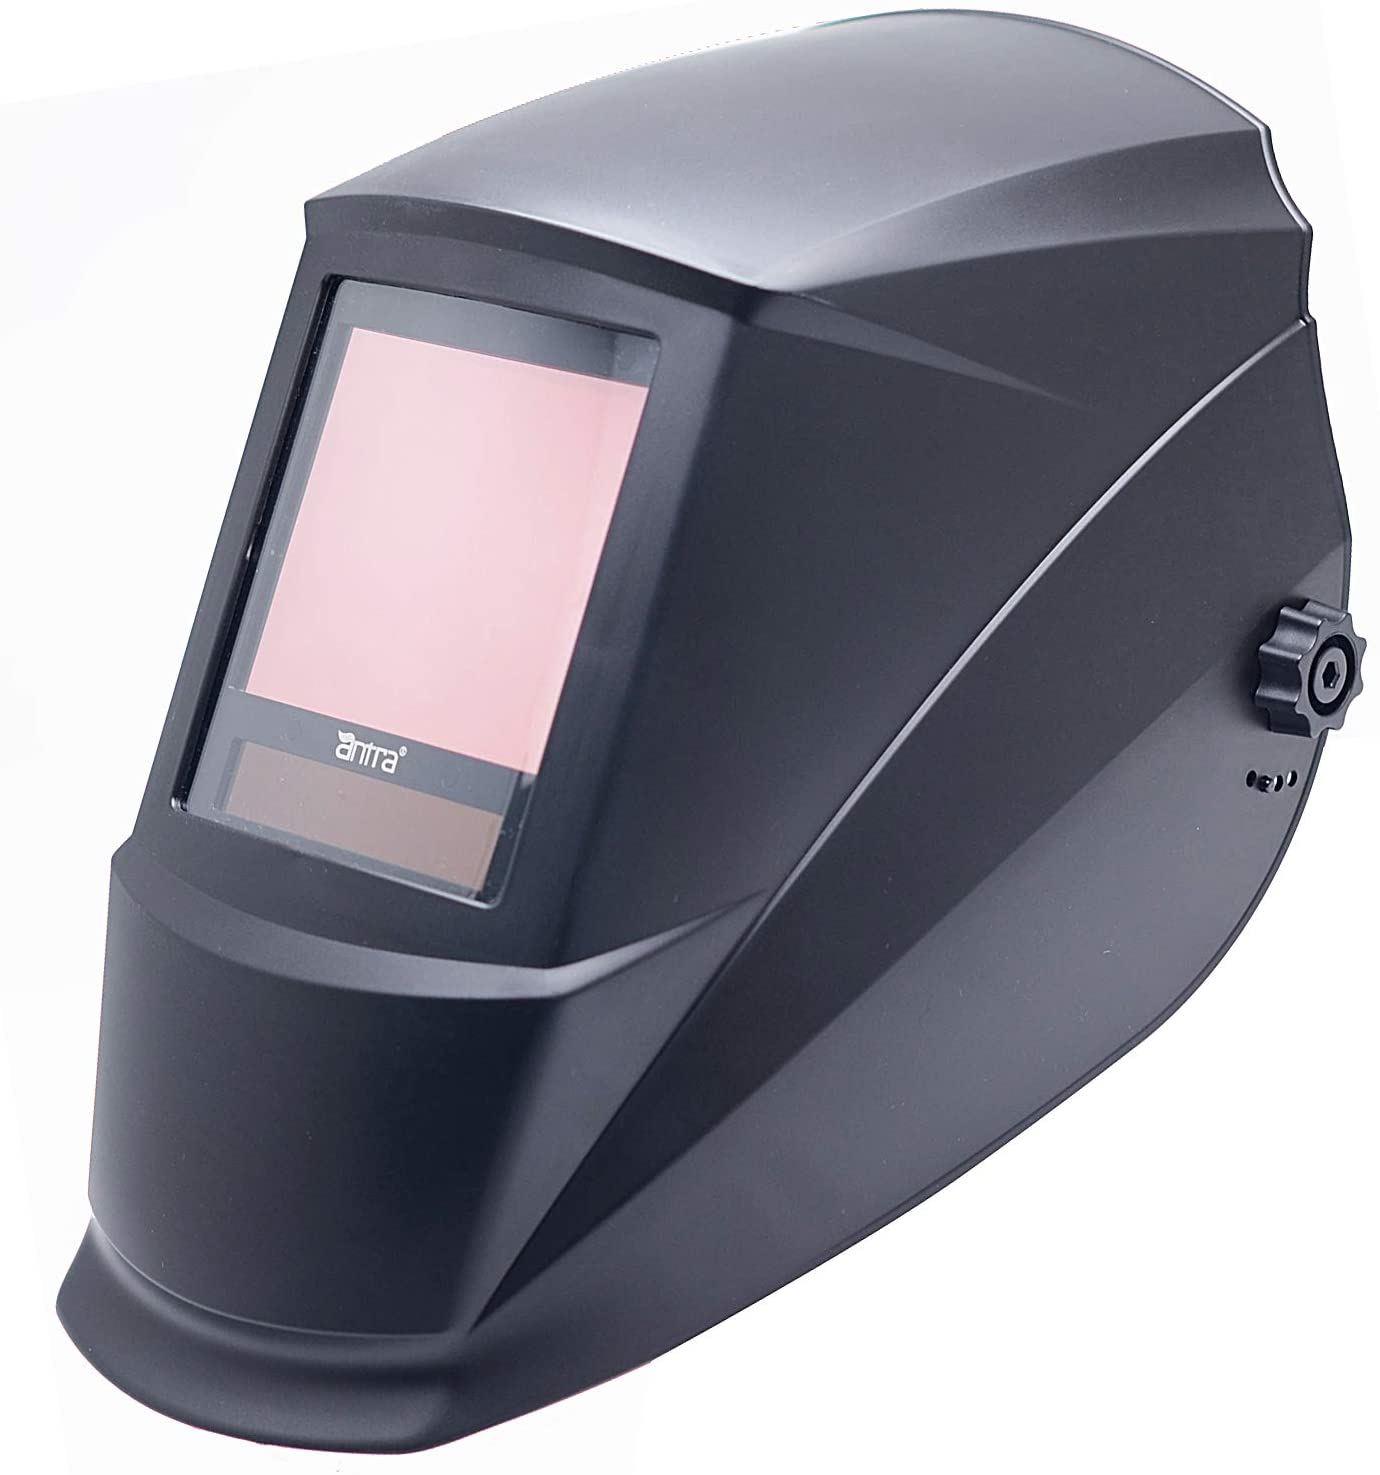 Antra True Color Huge Viewing, Super Wide Shade Range 4:5-14 Auto Darkening Welding Helmet A77D, for TIG, MIG:MAG, MMA, Plasma, Grinding, Solar Power w Lithium Backup, 6+1 Extra lens covers